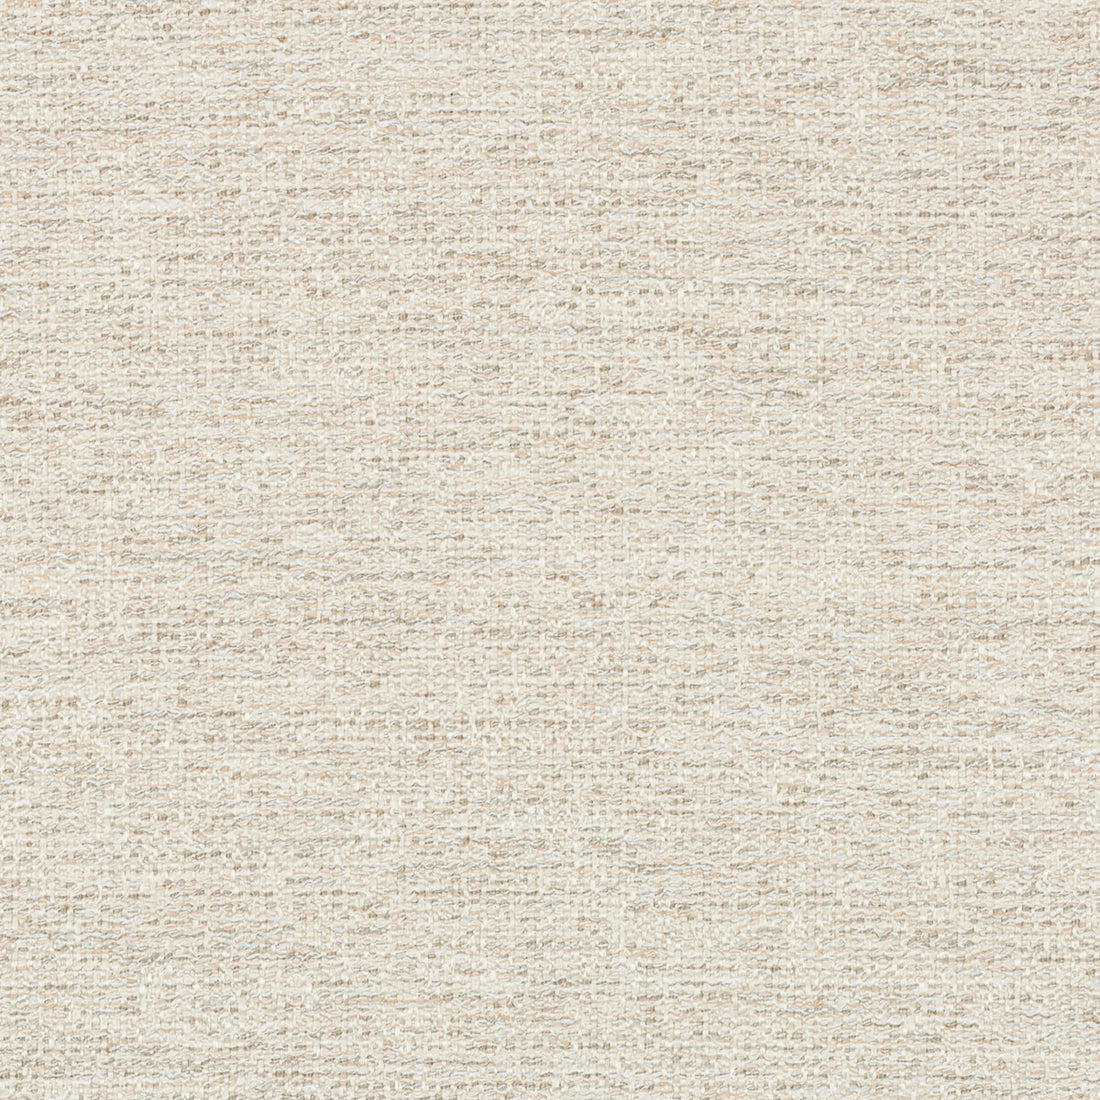 Tide Over fabric in dune color - pattern 35922.111.0 - by Kravet Couture in the Vista collection